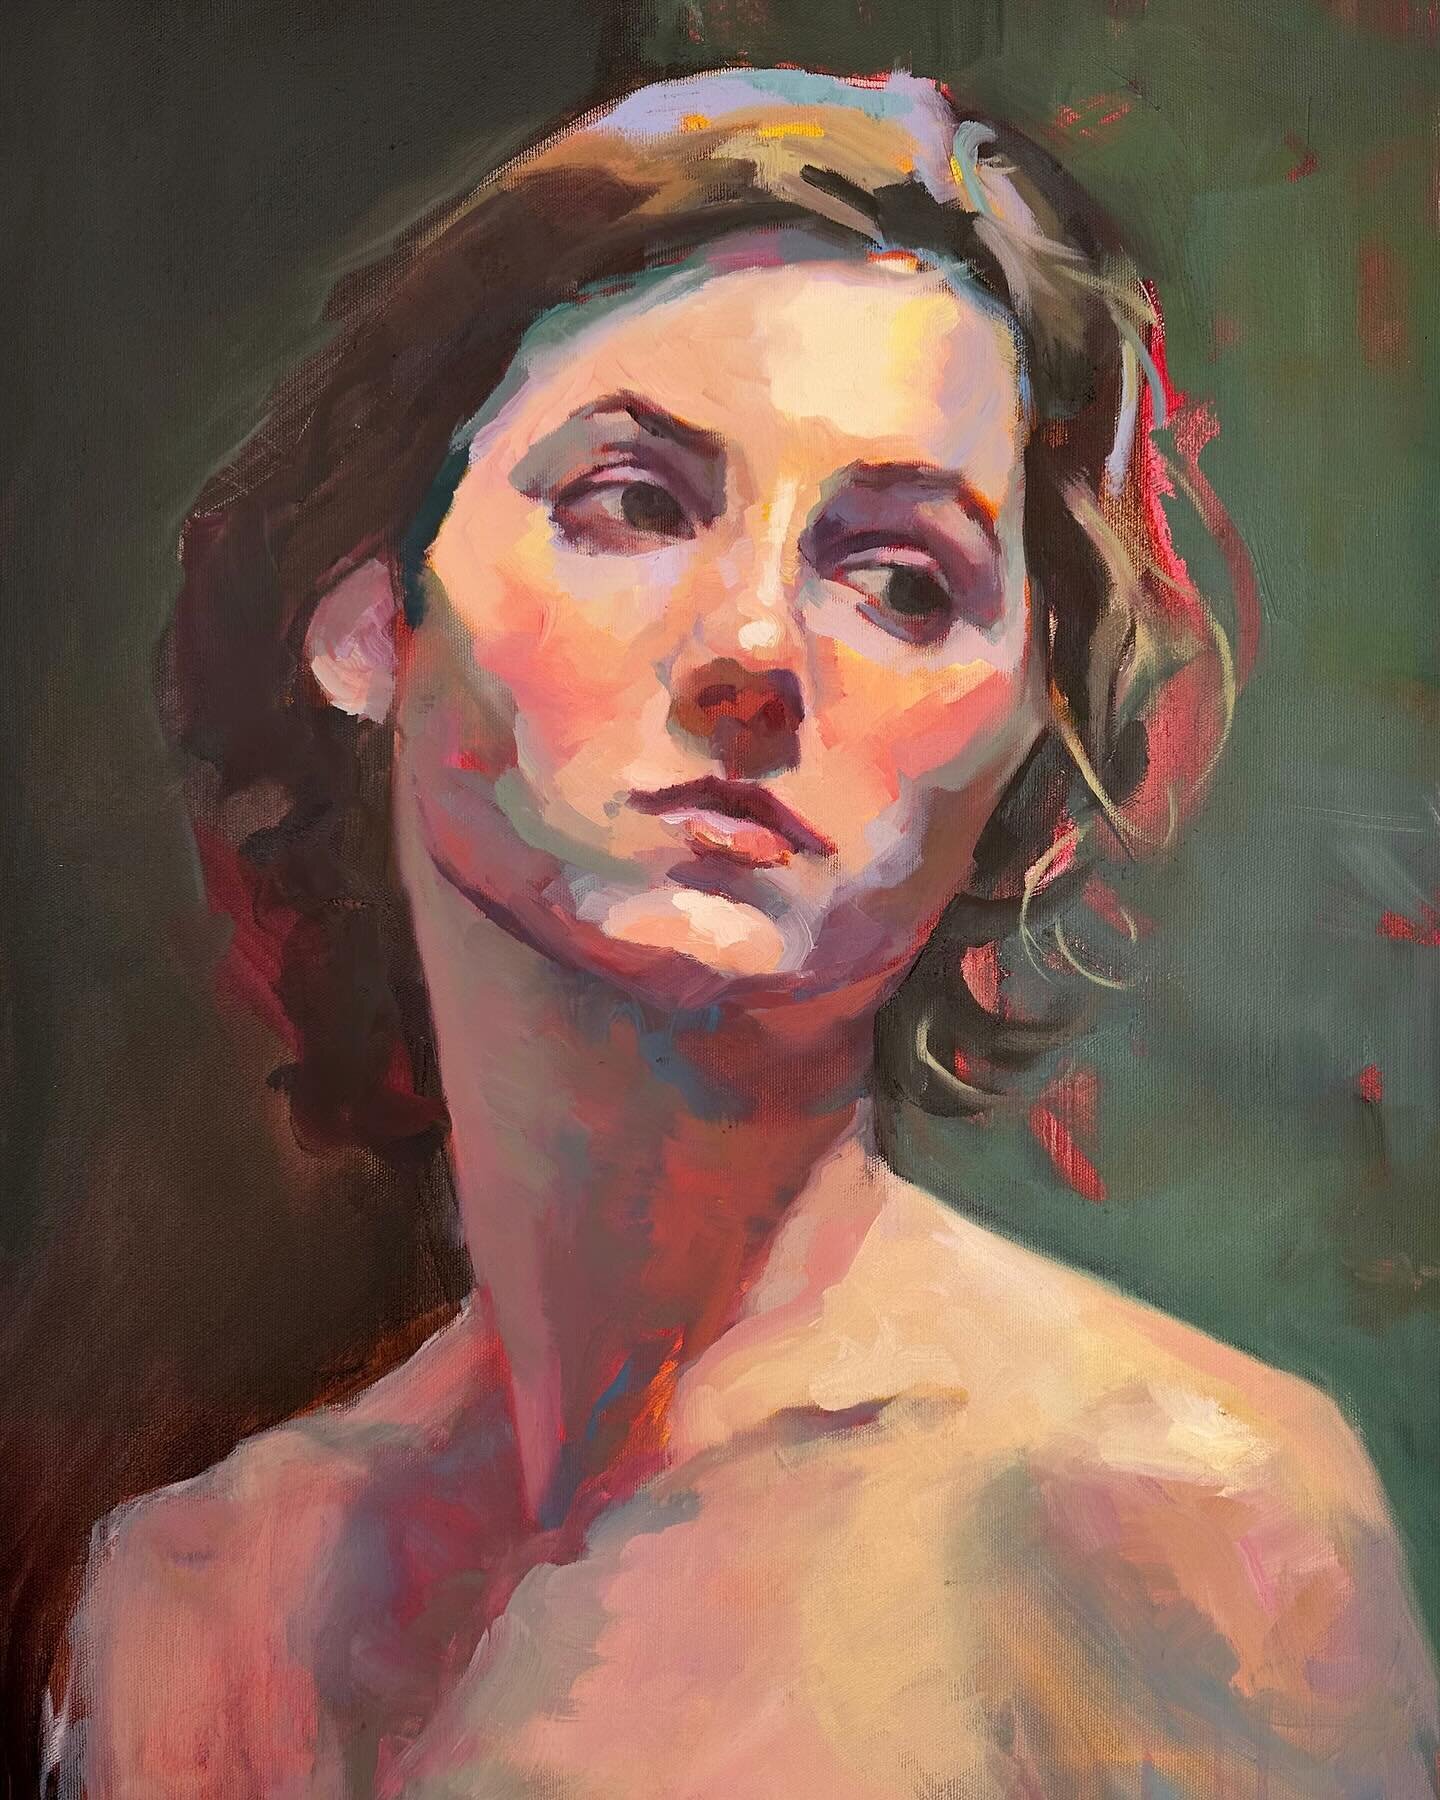 Getting back to painting people. My painting was based on a model (Genevieve) from @marc_chatov&rsquo;s figure painting class. Genevieve&rsquo;s classical poses were a true work of art! Actually what I remember most is her adventurous spirit&mdash;sh